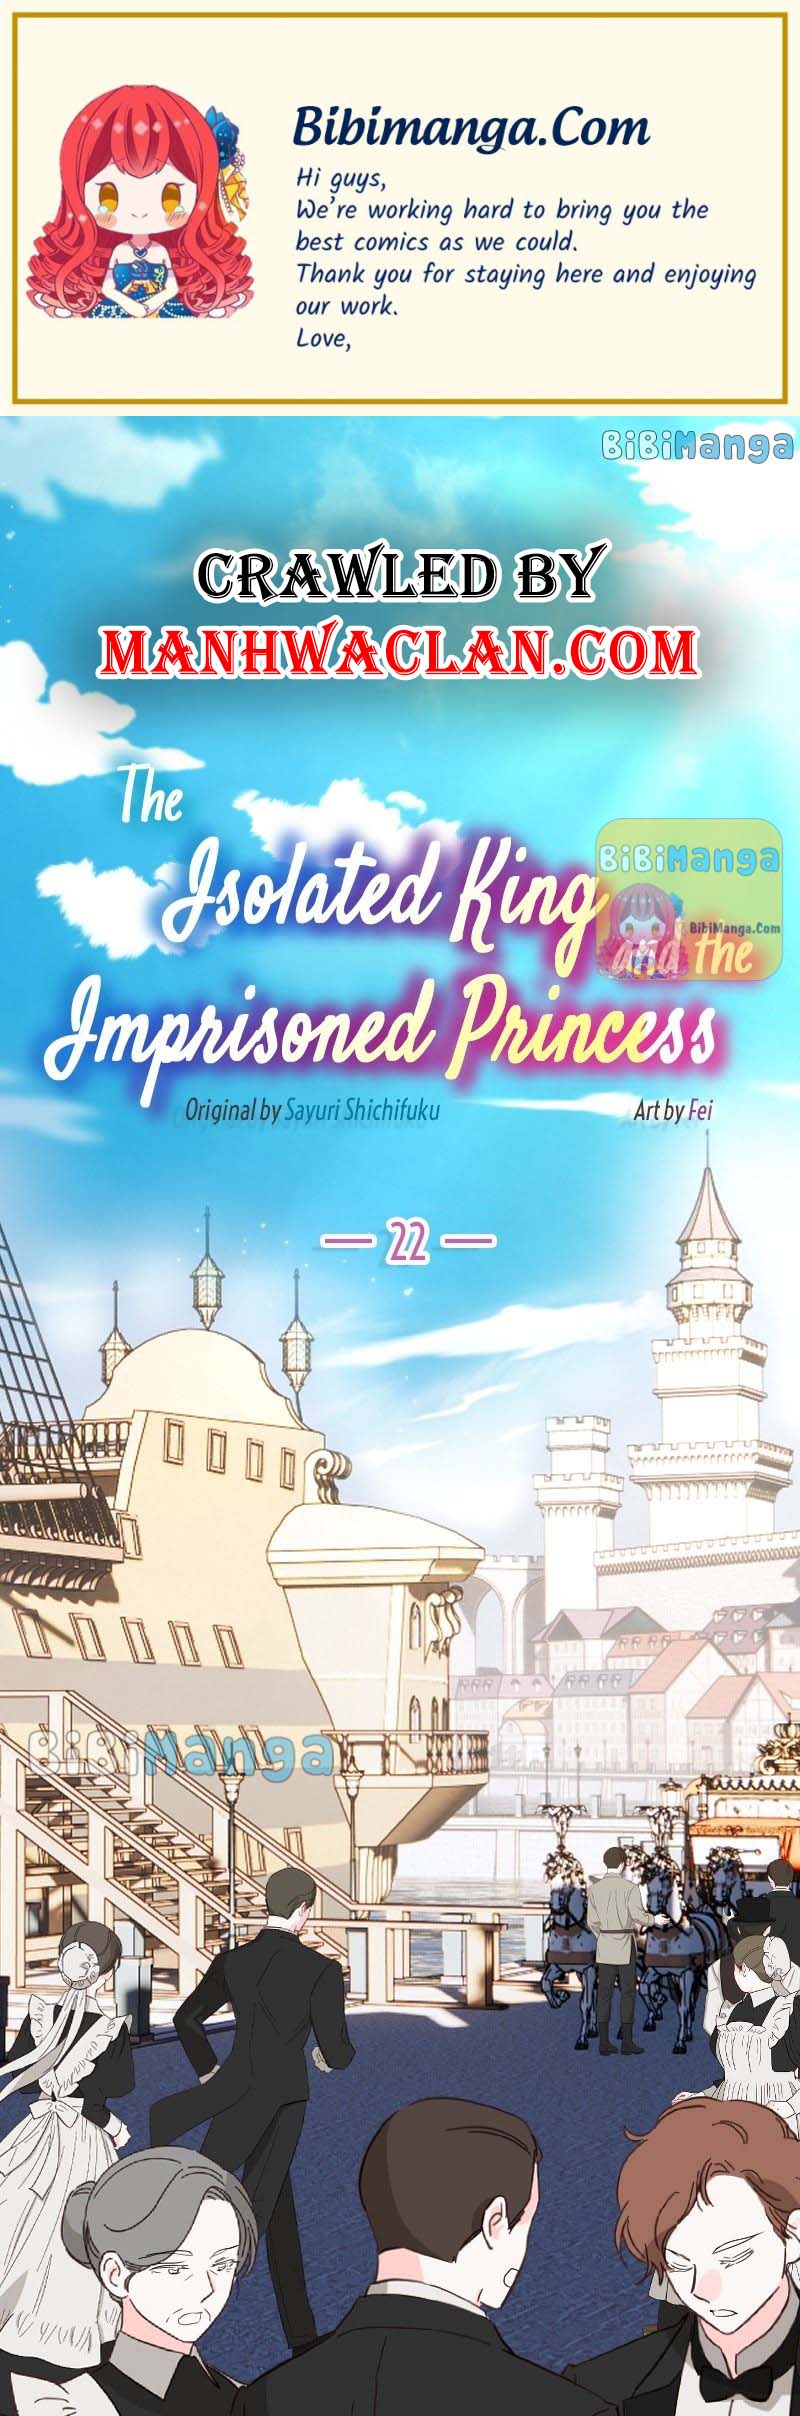 The Isolated King and the Imprisoned Princess - HARIMANGA